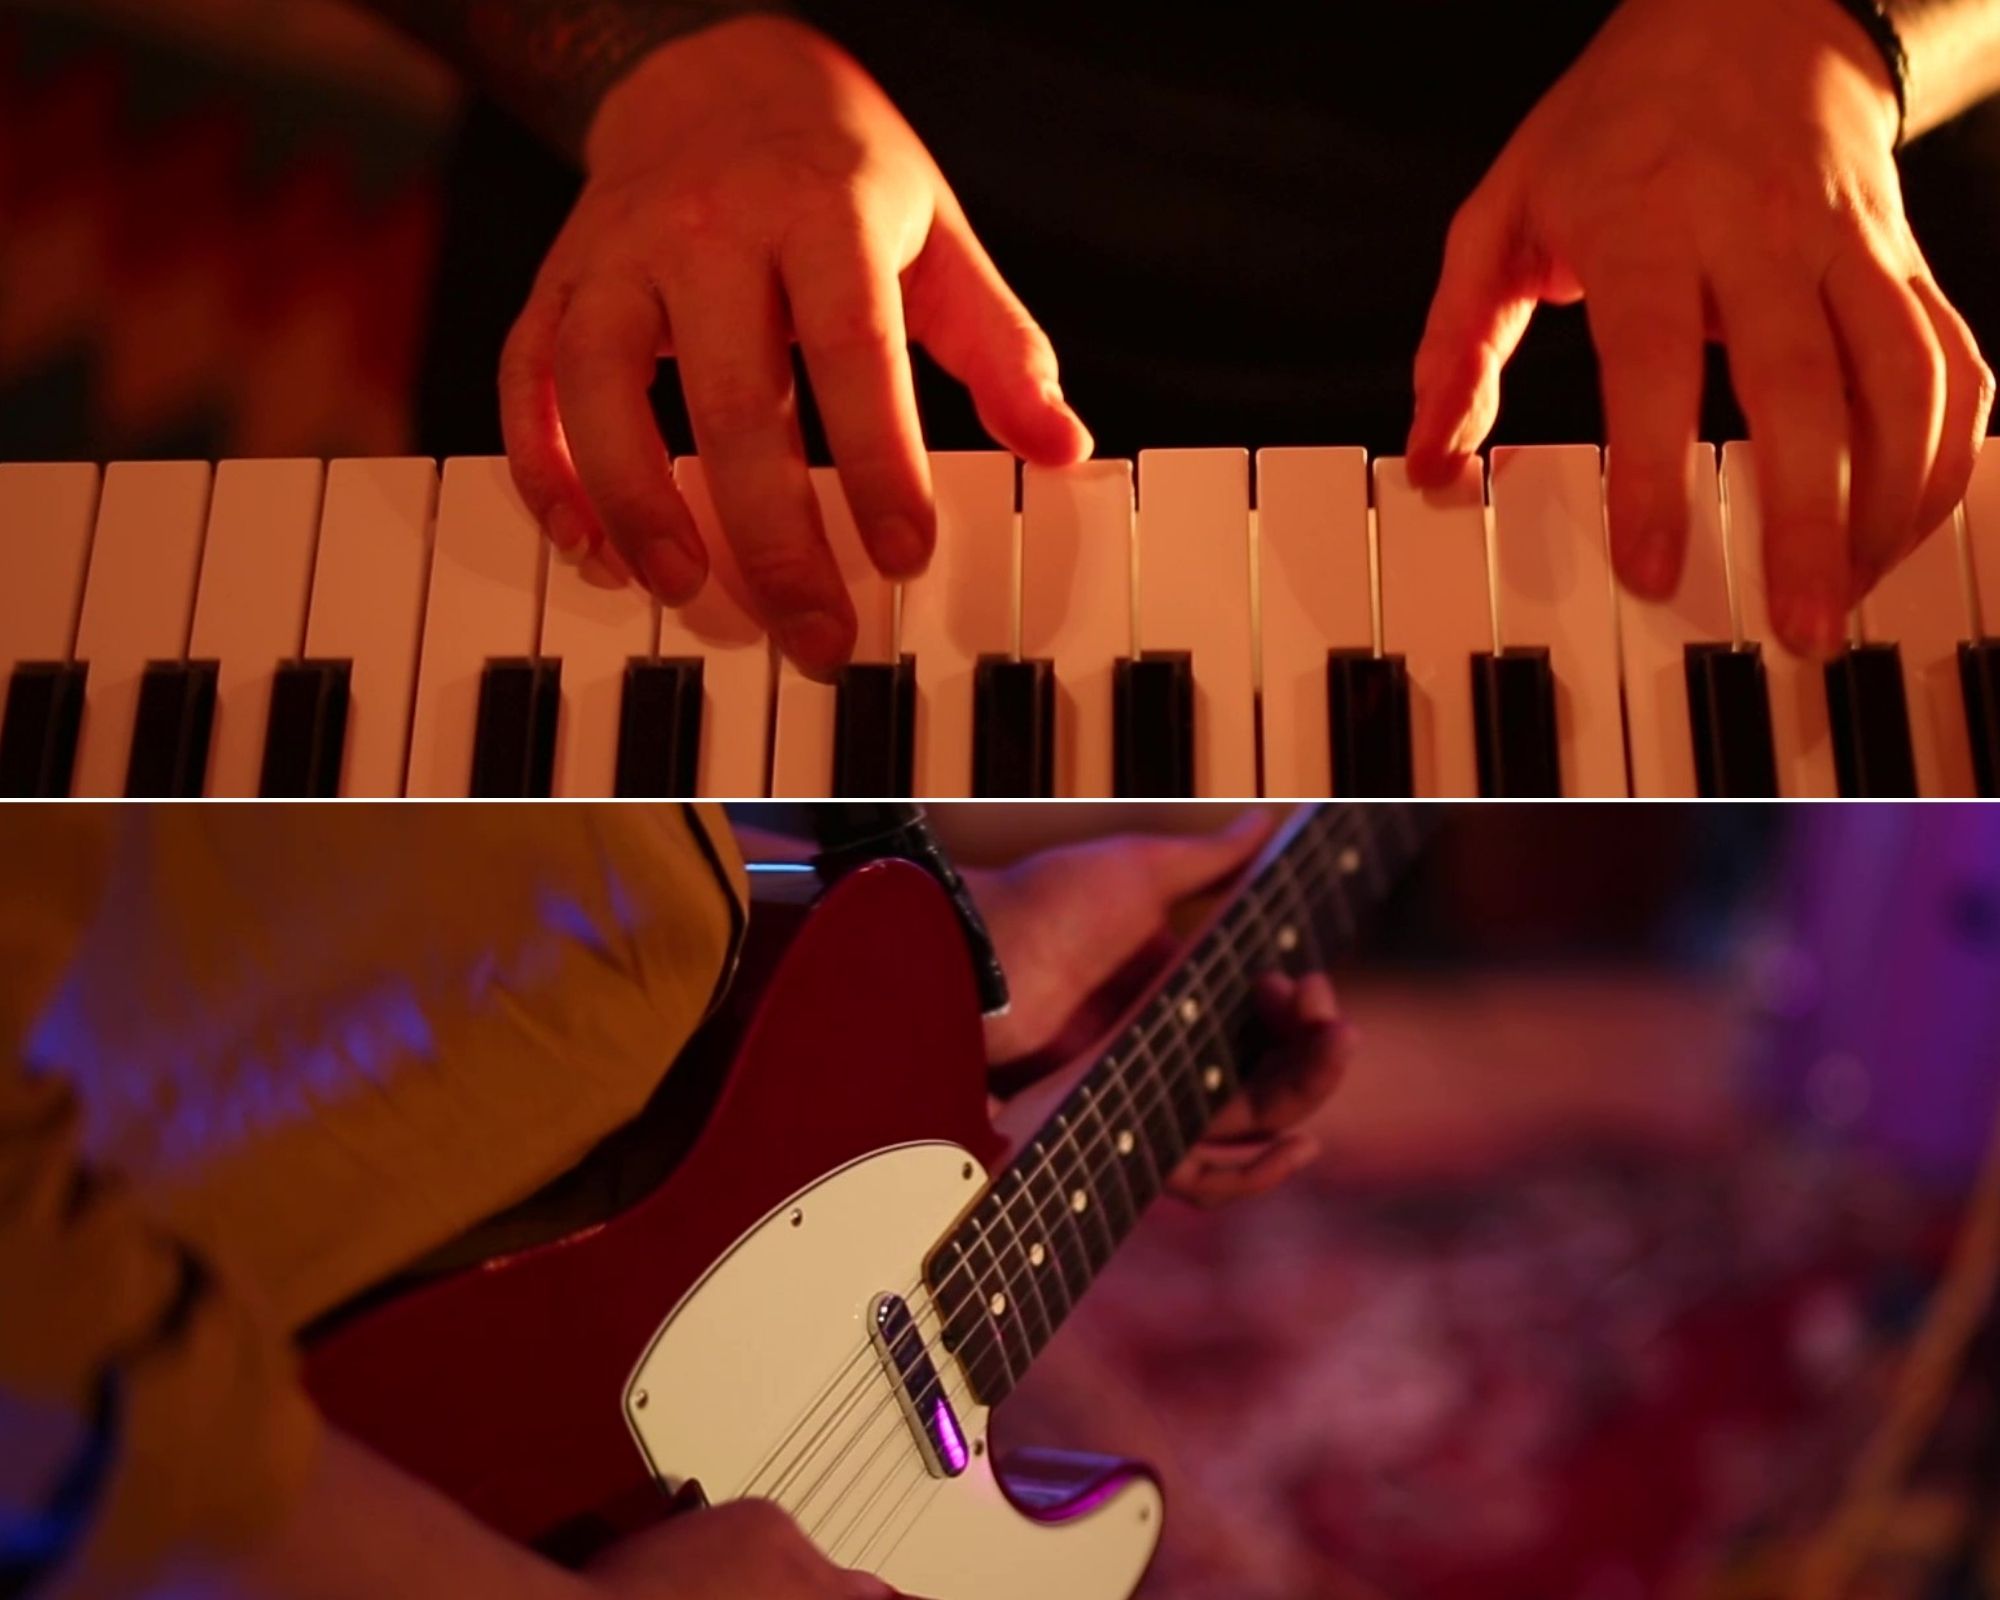 Musicians playing keyboard and electric guitar.